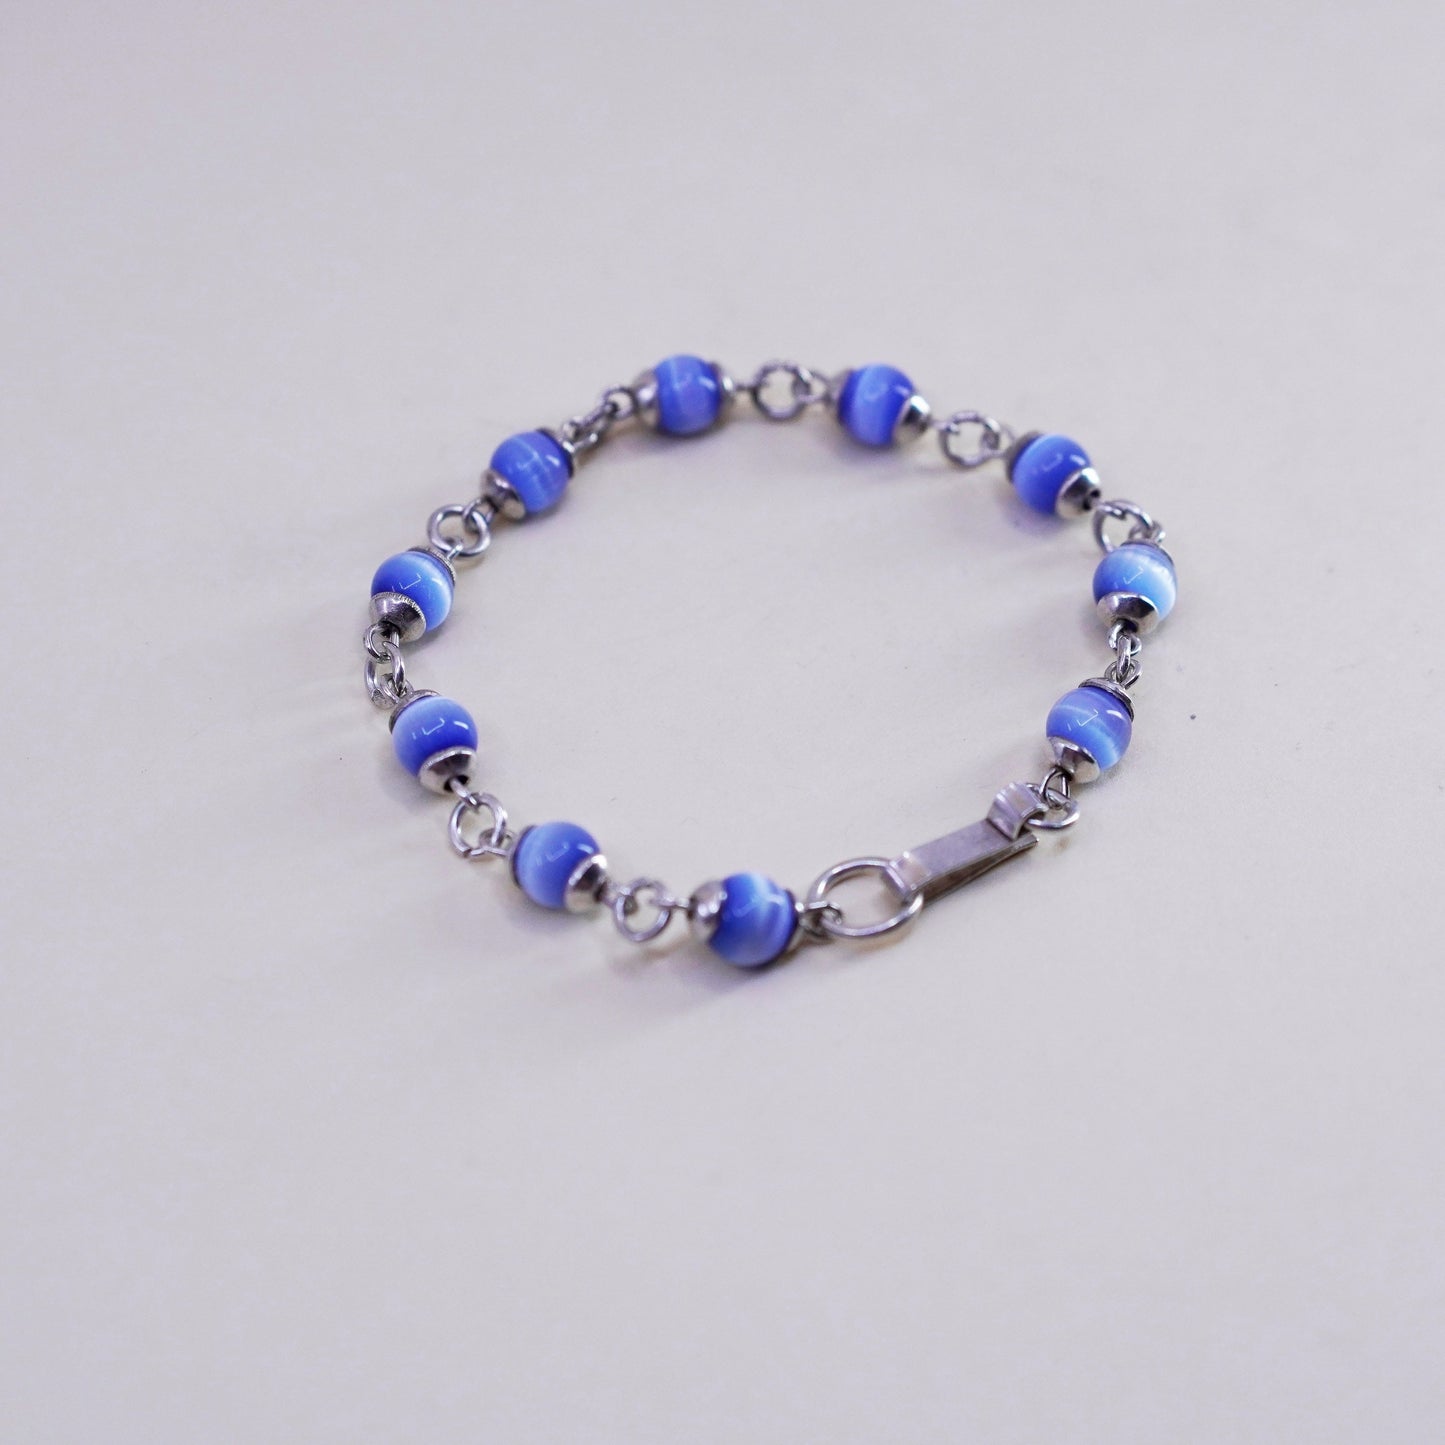 6”, Vintage Mexico sterling silver bracelet, 925 beads with blue cats eye